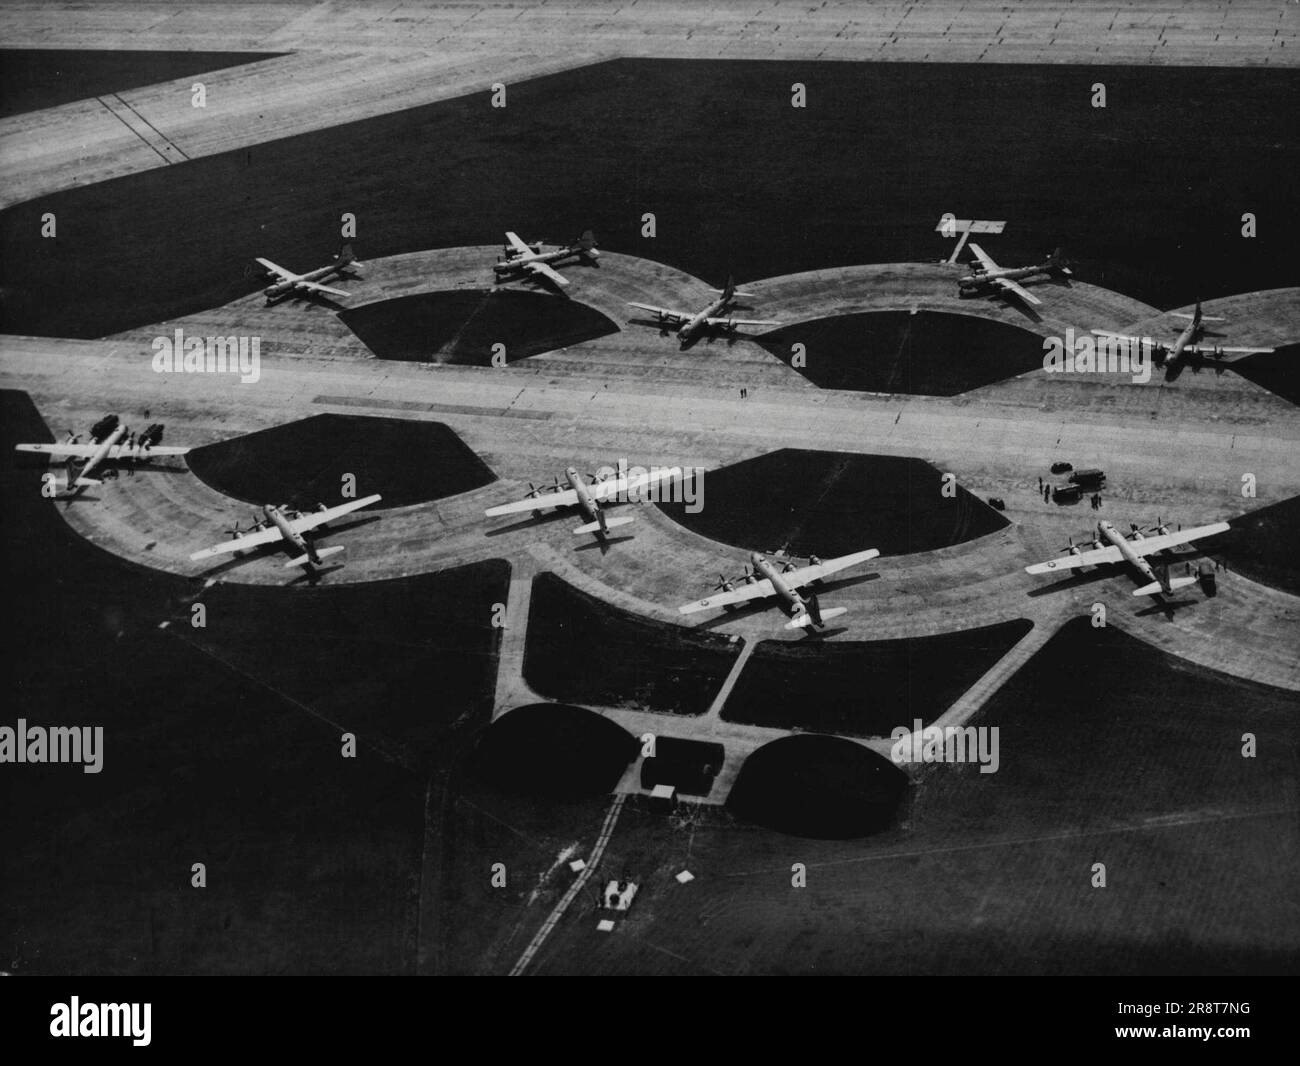 Pattern or Air Might: Spaced on the dispersals at Marham Aerodrome, Lincolnshire, are ten United States Boeing 29 Super Fortresses, pictured from the air today, July 17. These aircraft are some of the sixty Superforts which flew in to three Lincolnshire Airfields today on what is described as a 'Normal long-range Traing Flight'. With attendant sky-master transports carrying ground crew and equipment, they made up the biggest air fleet ever to cross the Atlantic in peace-time. They will remain in Britain for several weeks before flying on to Germany. July 29, 1948. (Photo by Associated Pre… Stock Photo